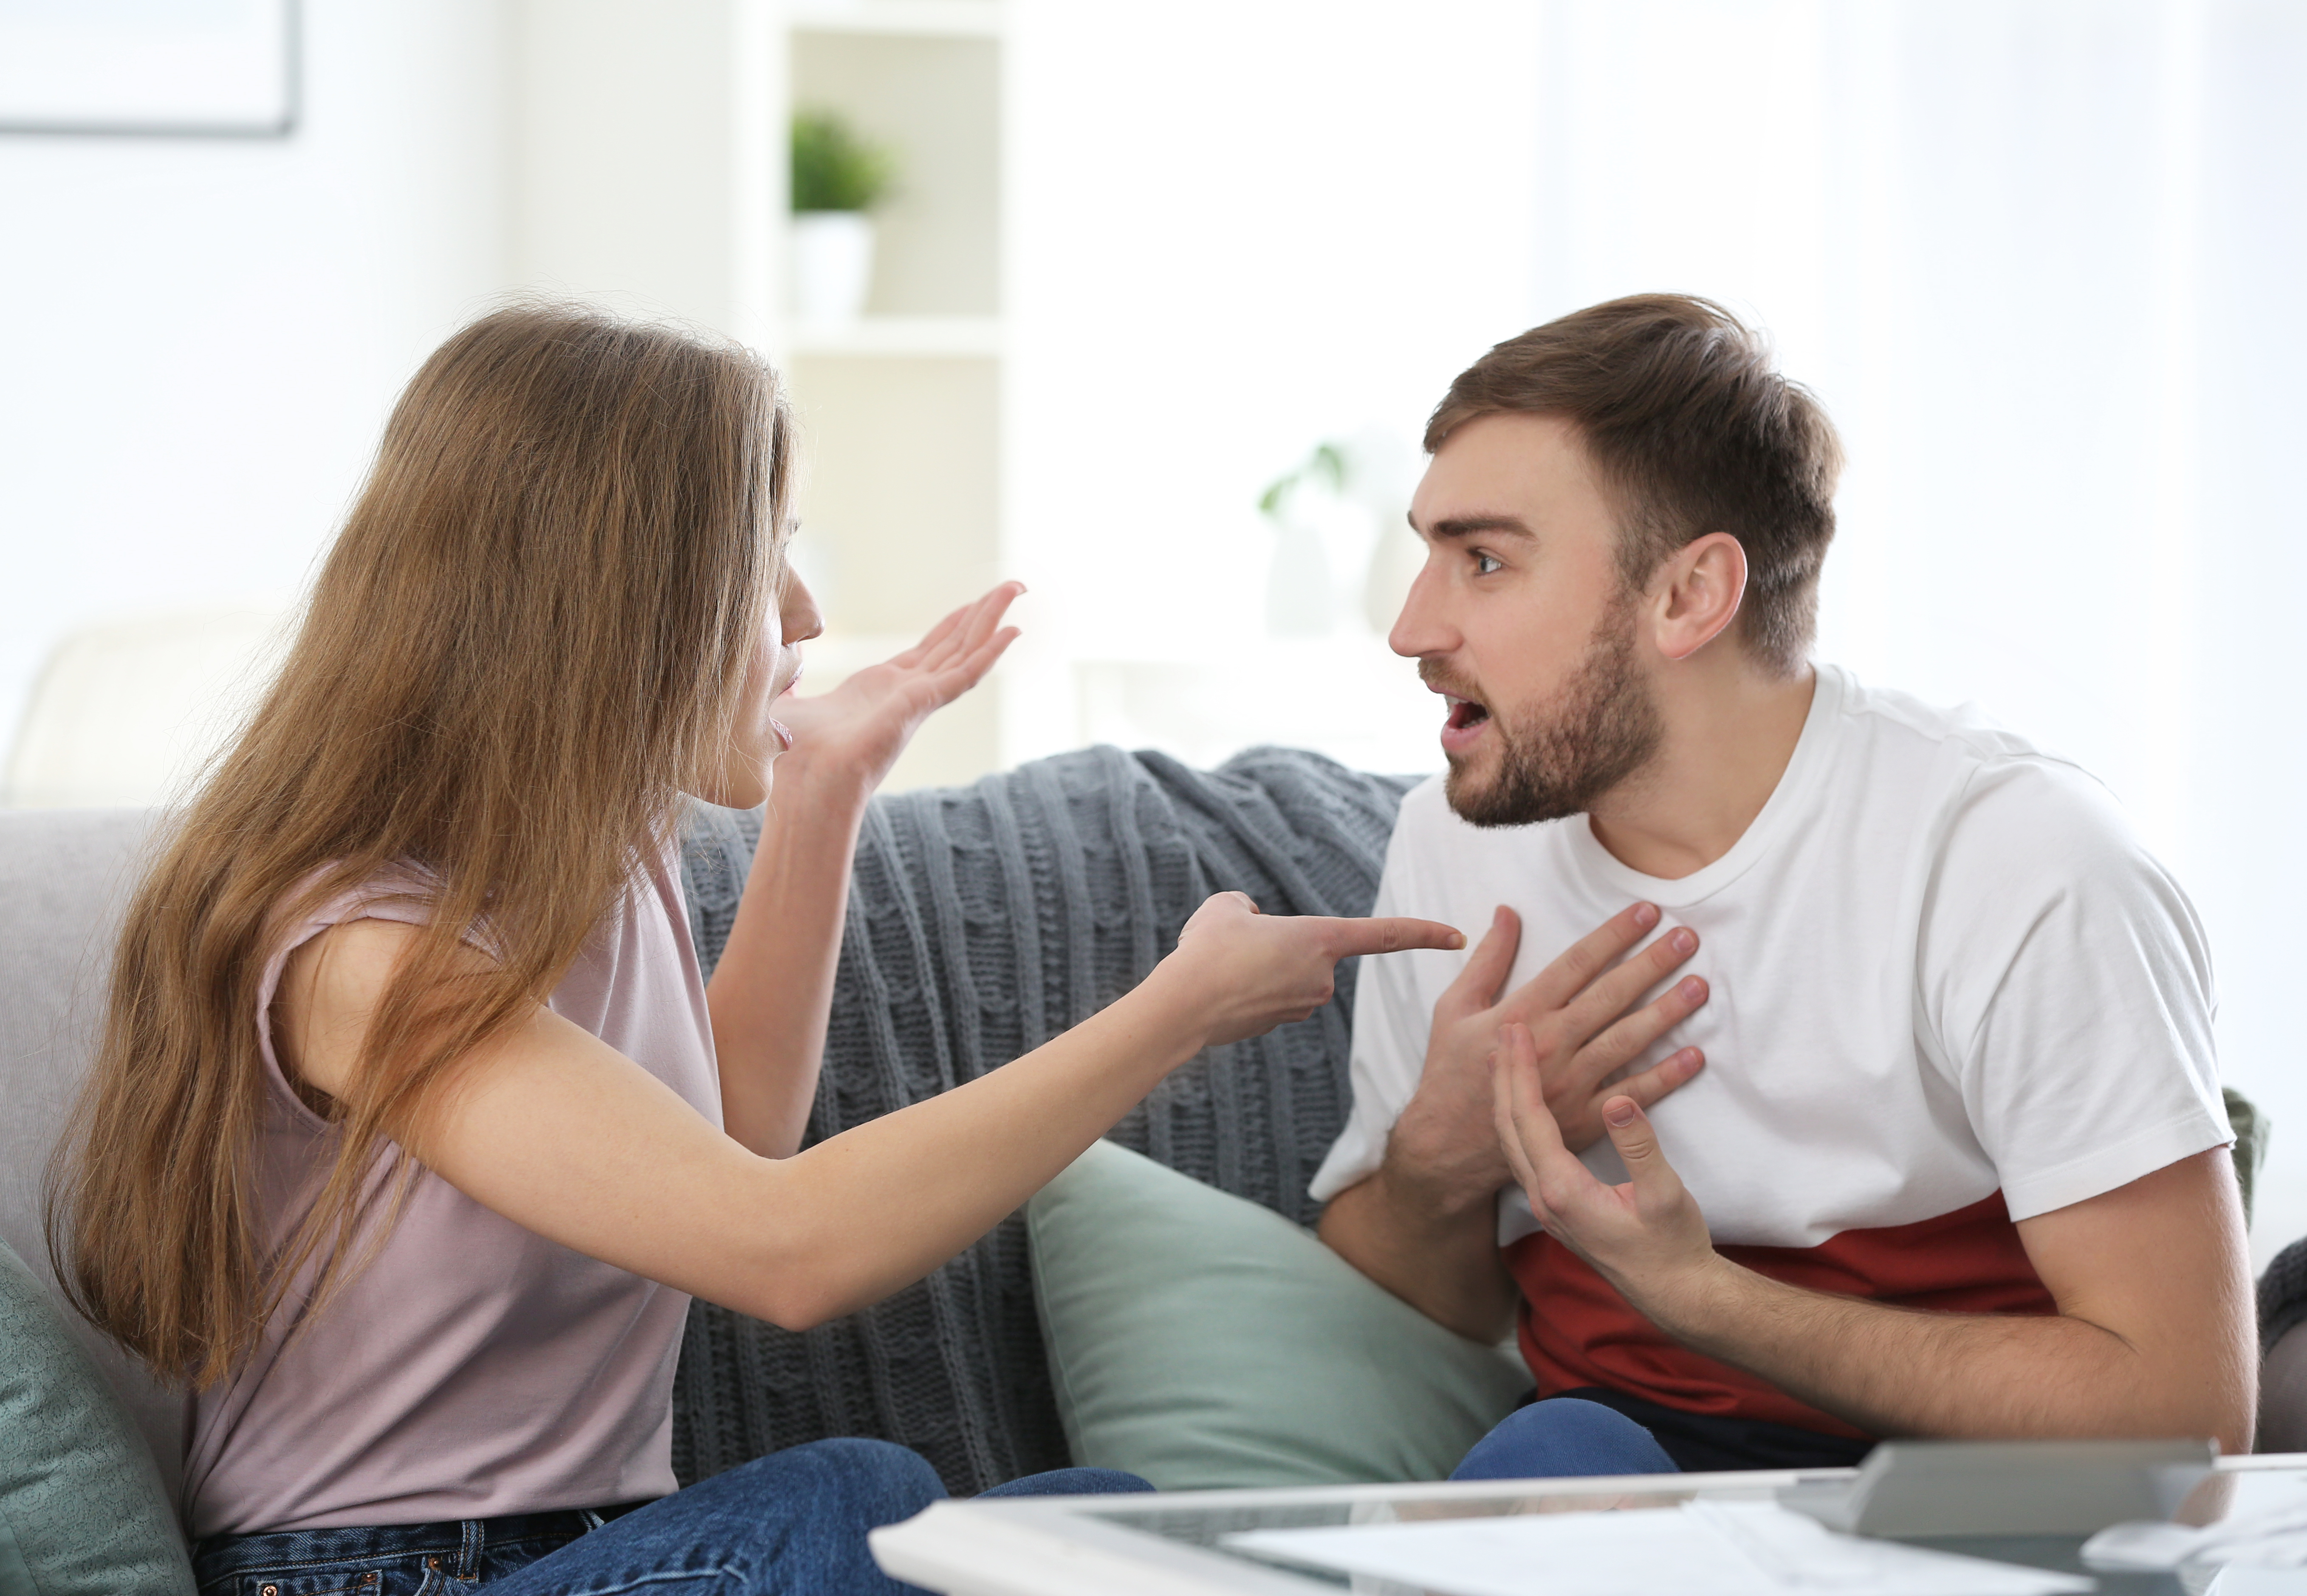 A couple arguing on a couch | Source: Shutterstock